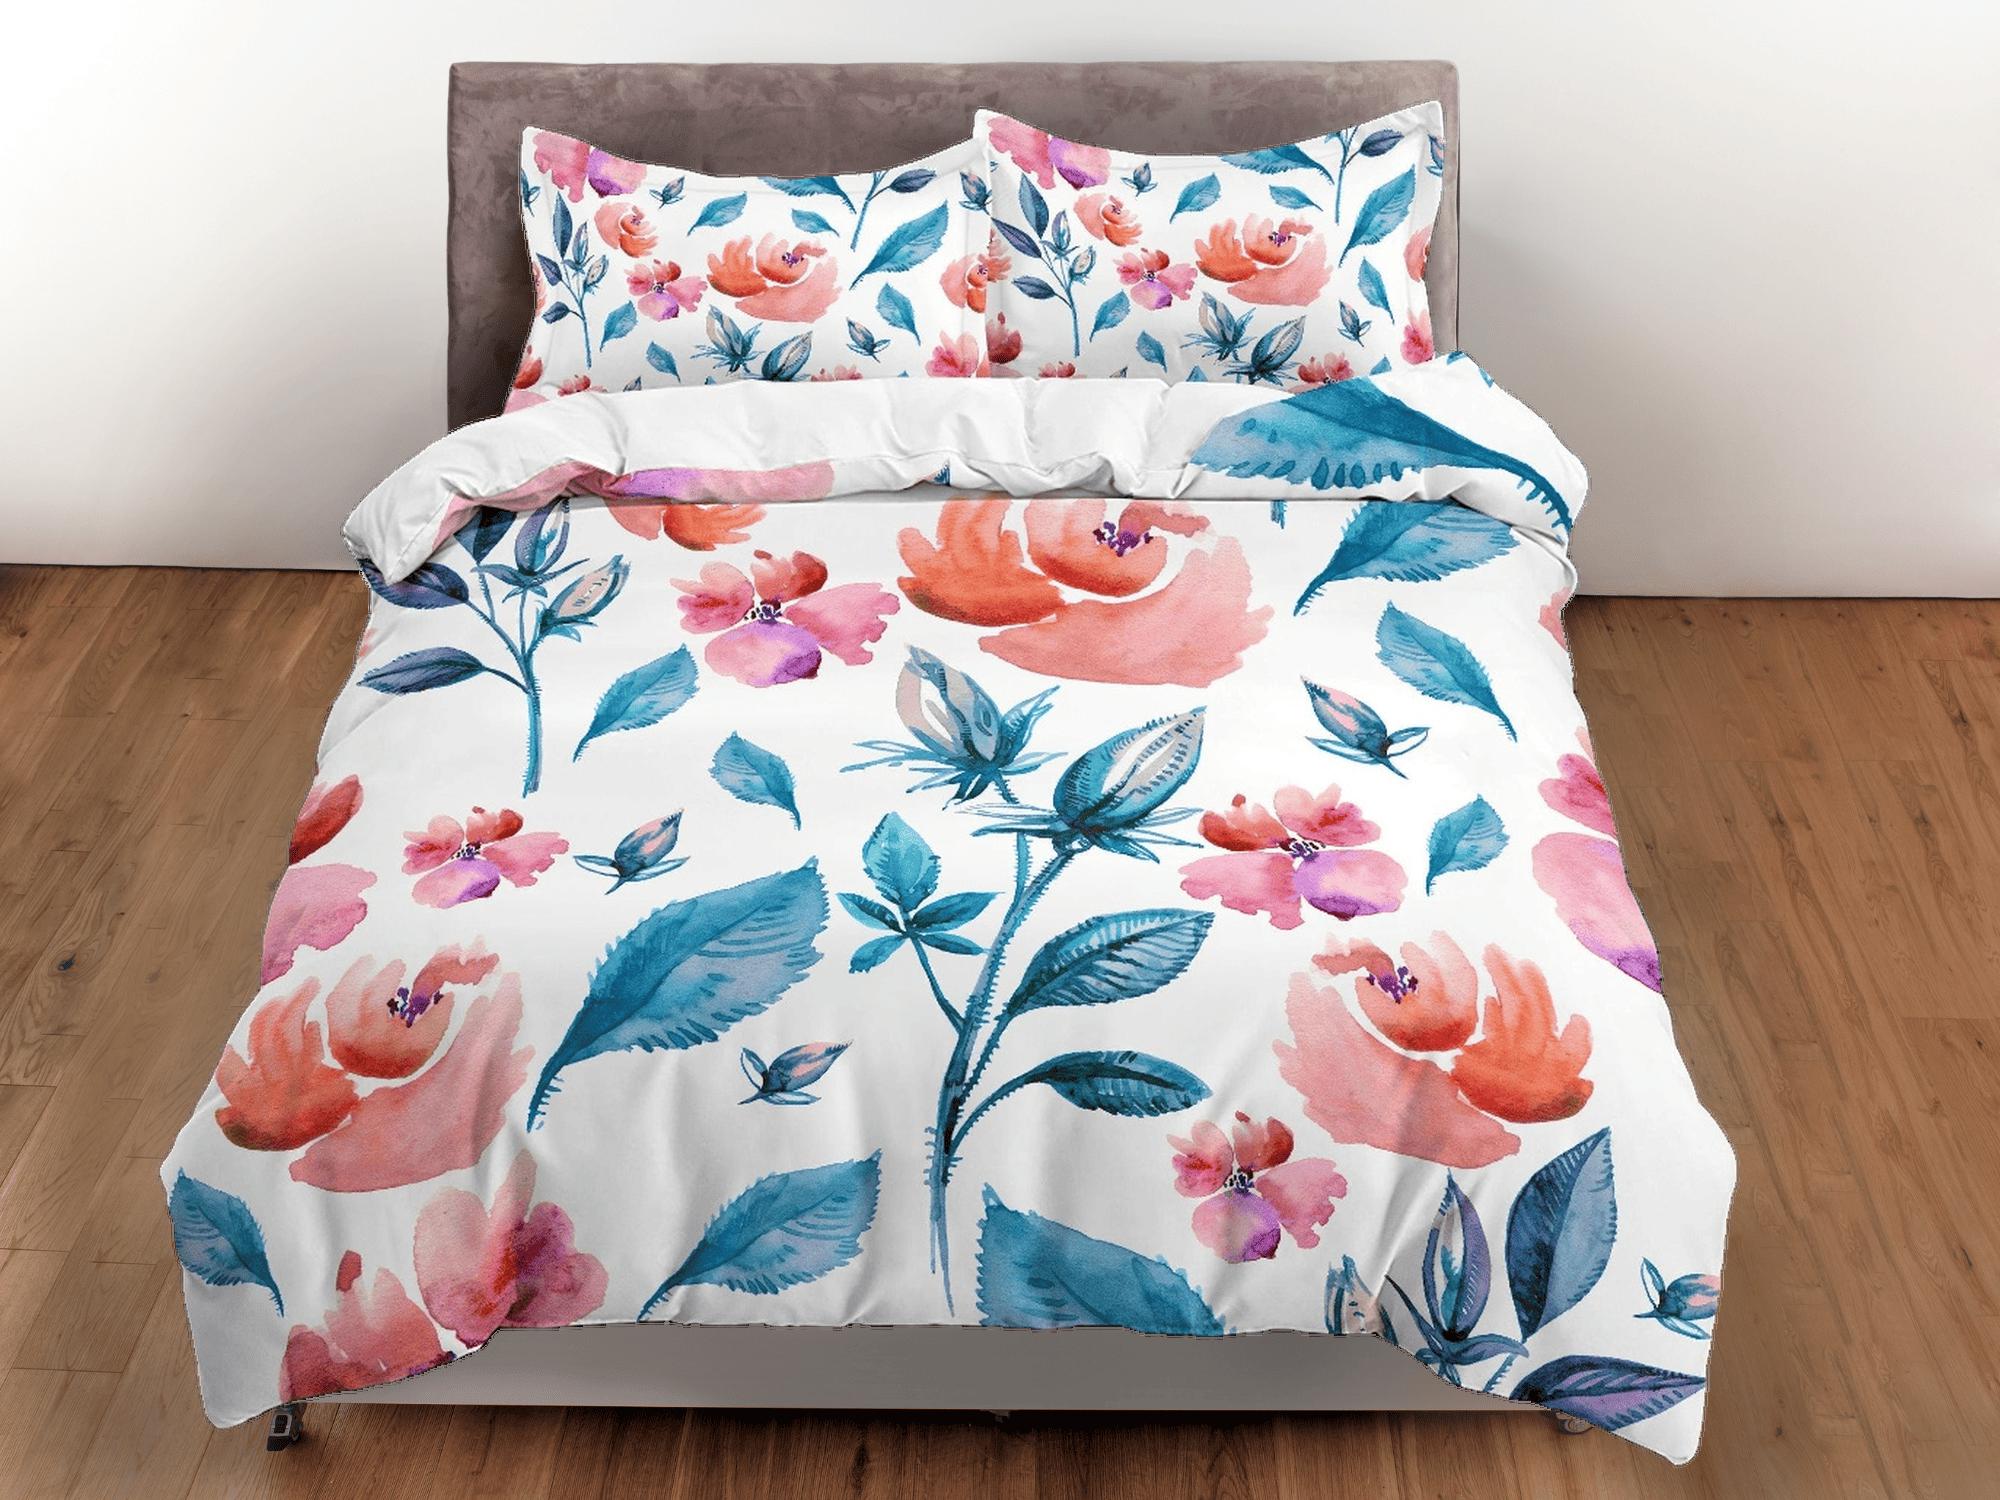 daintyduvet Floral painting style duvet cover colorful bedding, teen girl bedroom, baby girl crib bedding boho maximalist bedspread aesthetic bedding